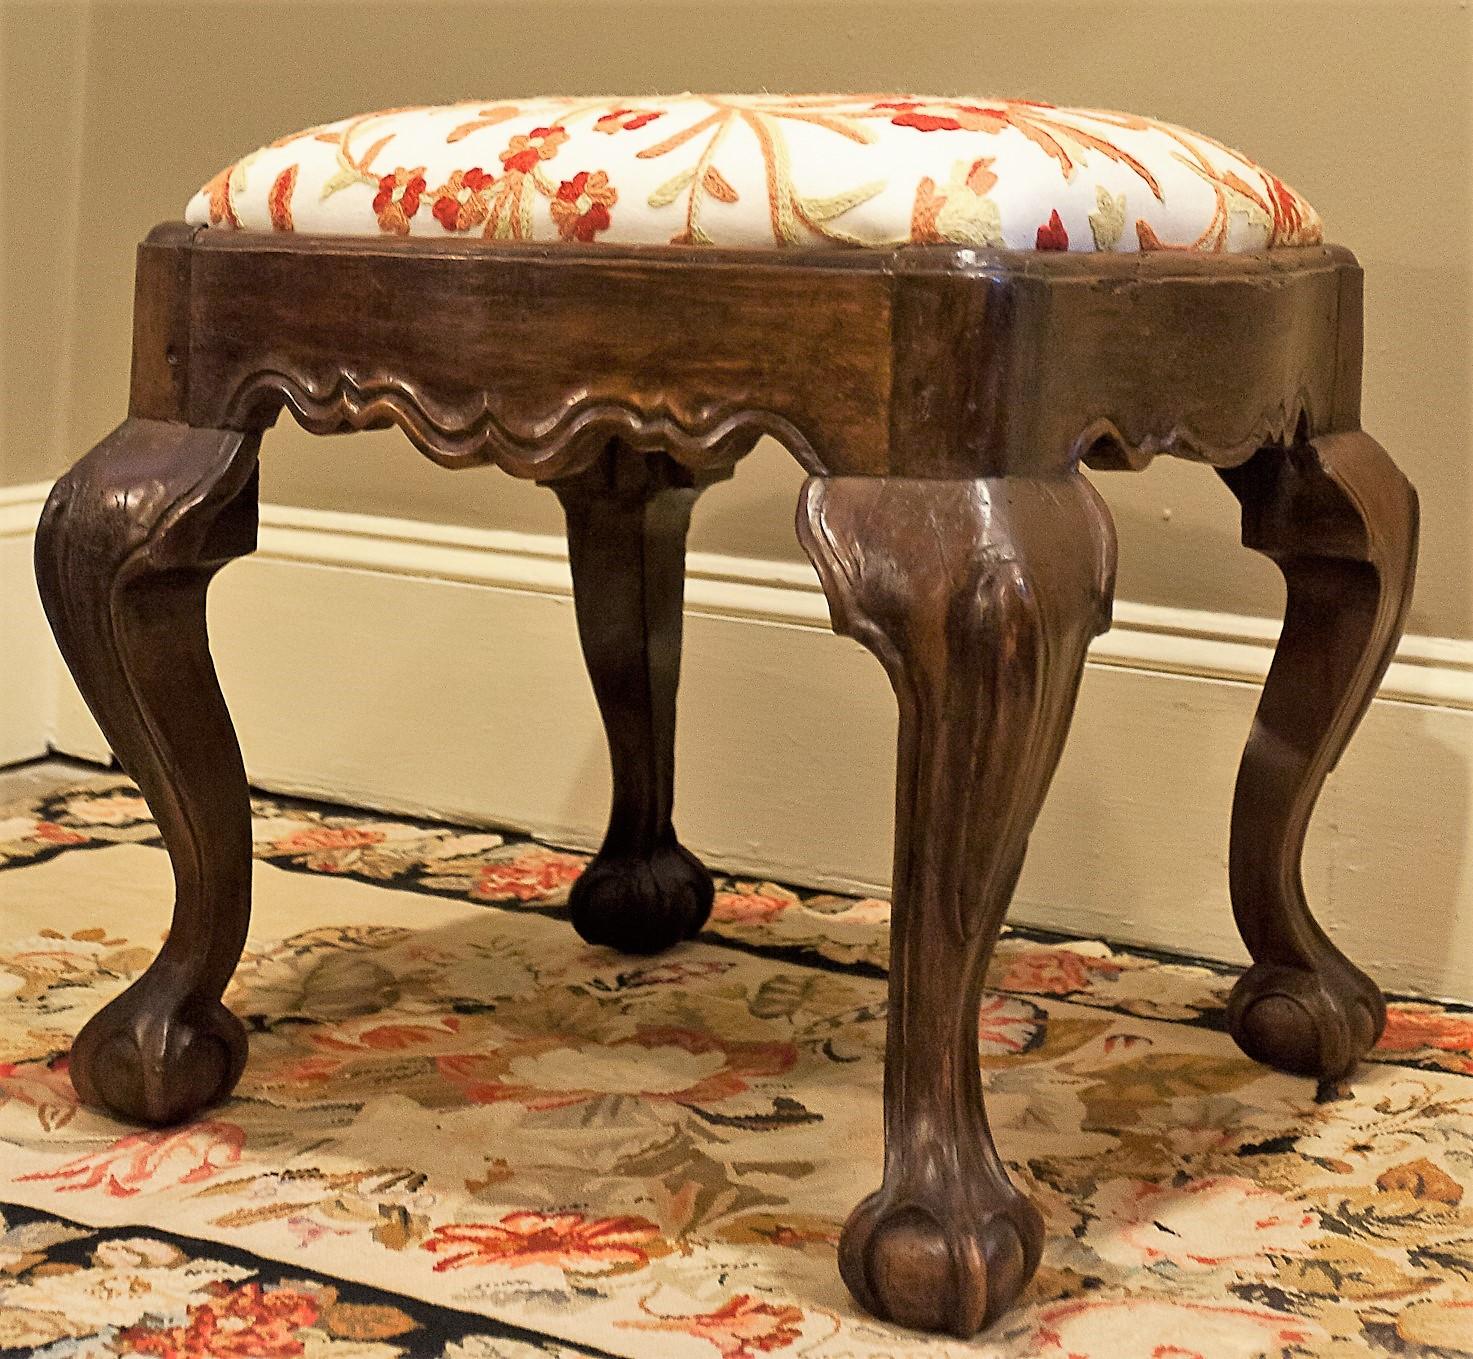 This beautiful Chippendale style walnut stool is hand carved, and the slip seat is upholstered in crewel on an off-white ground. The piece has an old finish and an excellent patina.